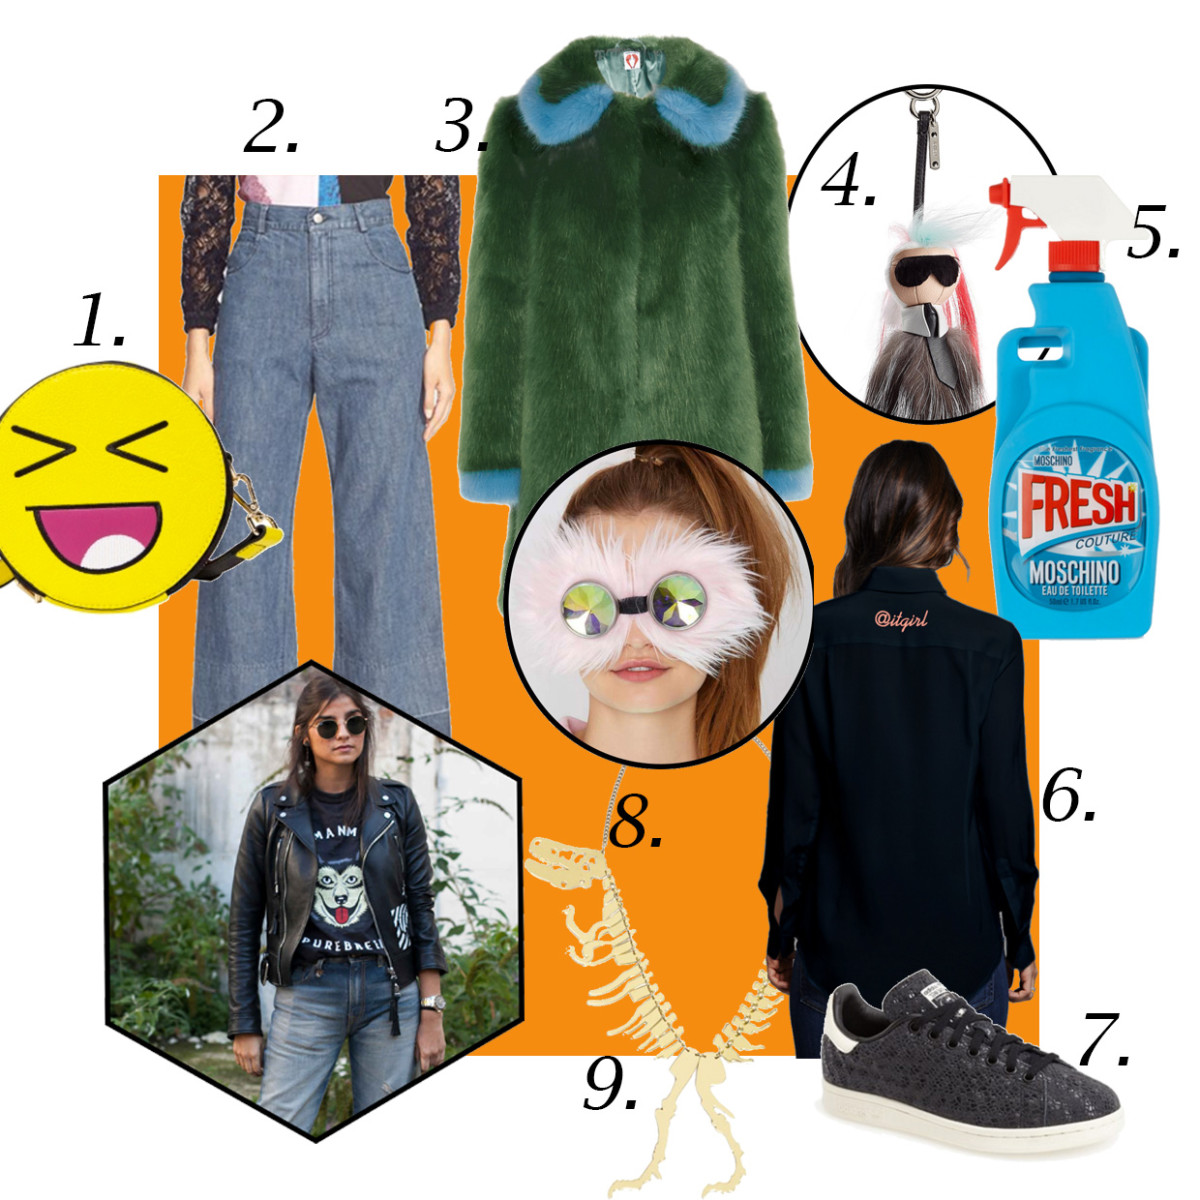 1. Skinnydip crossbody Bag, $44.00, available at Pixie Market; 2. Rachel Comey denim pants, $345, available at Nordstrom; 3. Shrimps coat, $995, available at Net-a-Porter; 4. Fendi Karlito keychain, $1,150, available at Stylebop; 5. Moschino phone case, $95, available on Net-a-Porter; 6. Maireclaire St. John personalized shirt, $445, available at Marieclaire St. John; 7. Adidas Stan Smith sneakers in white and green, $74.95, available at Nordstrom; 8. H0les Seein' Thangs Faux Fur Goggles, $100.00, available at Nasty Gal; 9. Giant dinosaur necklace, $209, available at Tatty Devine. Photo: Seen at Paris Fashion Week spring 2016. Emily Malan/Fashionista